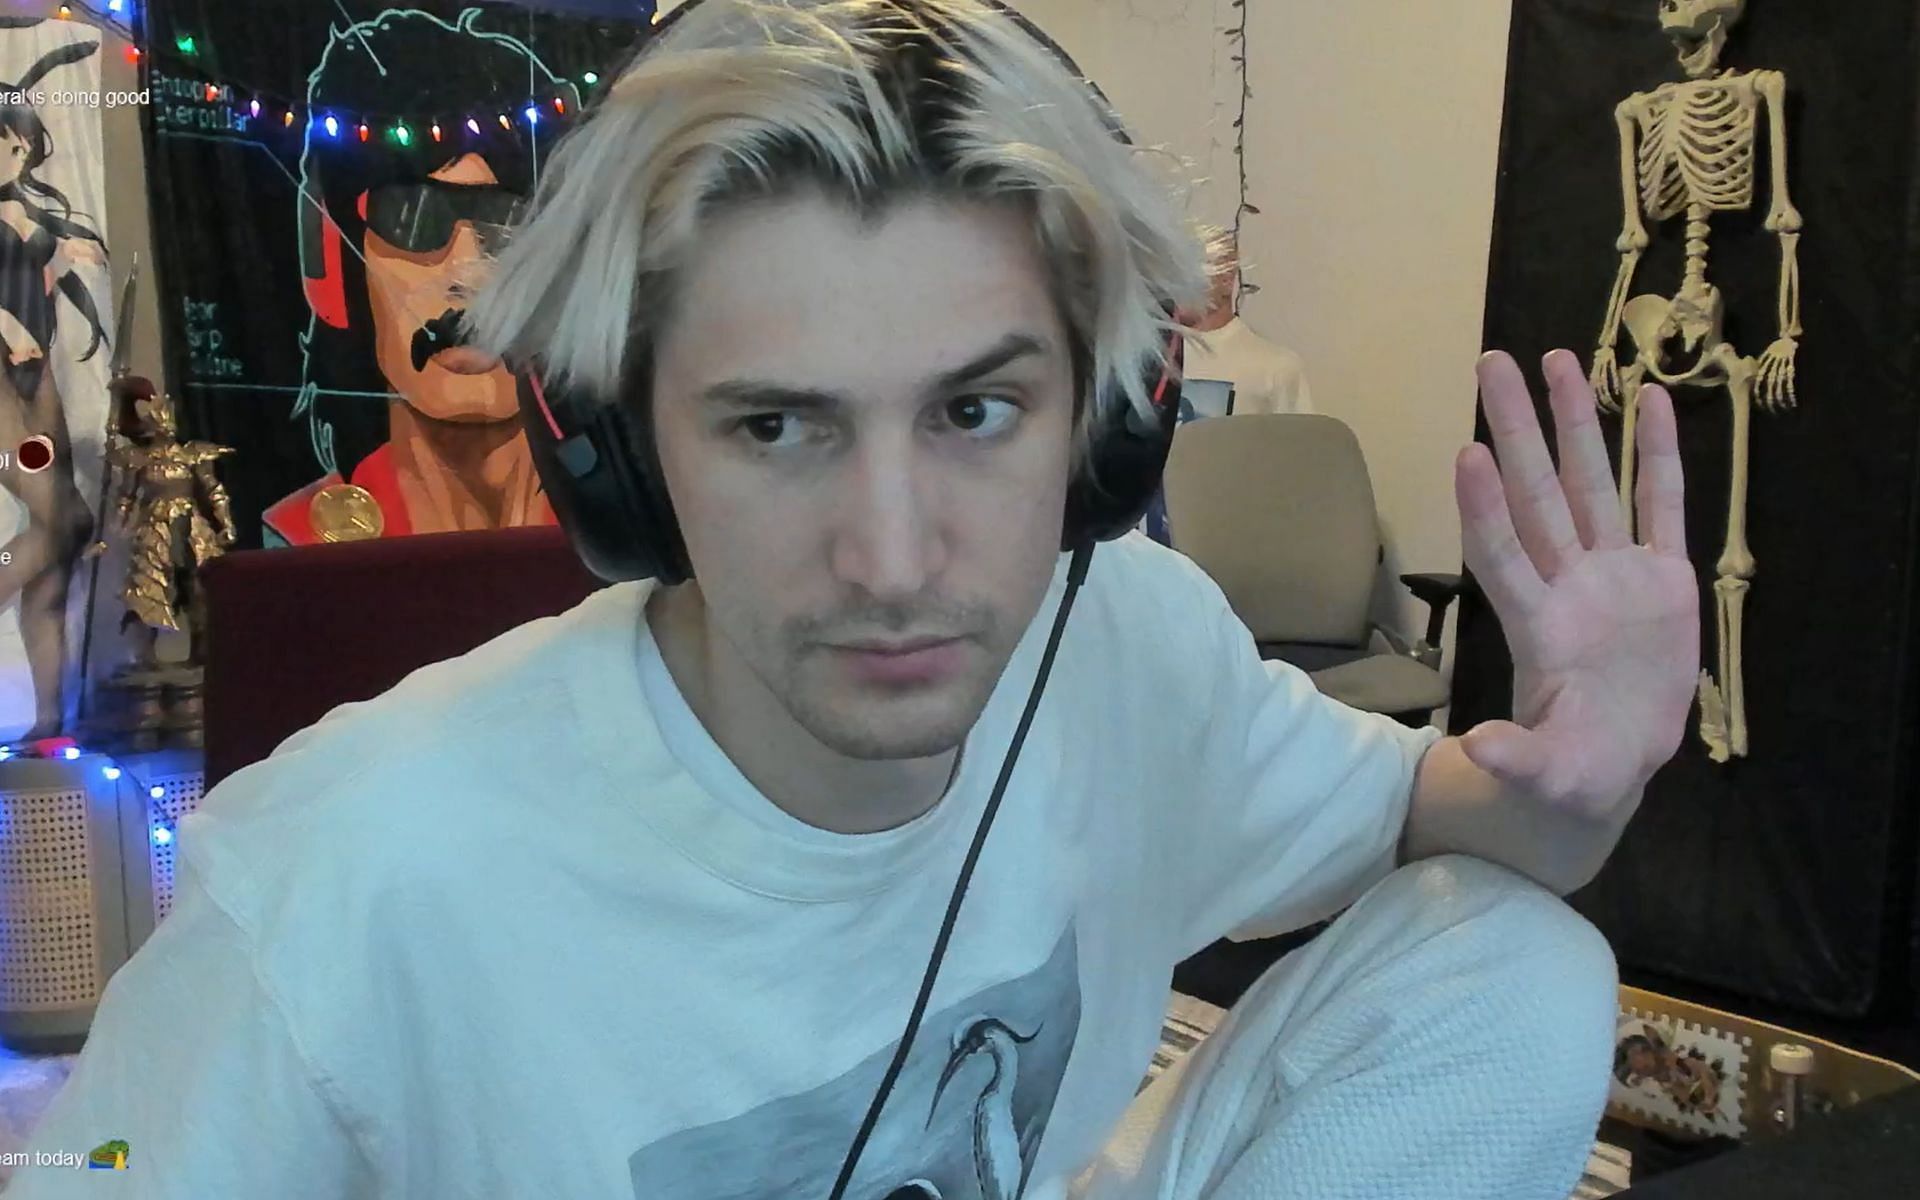 It S Just Wrong Xqc Gives His Take On A 19 Year Old Dating A 17 Year Old